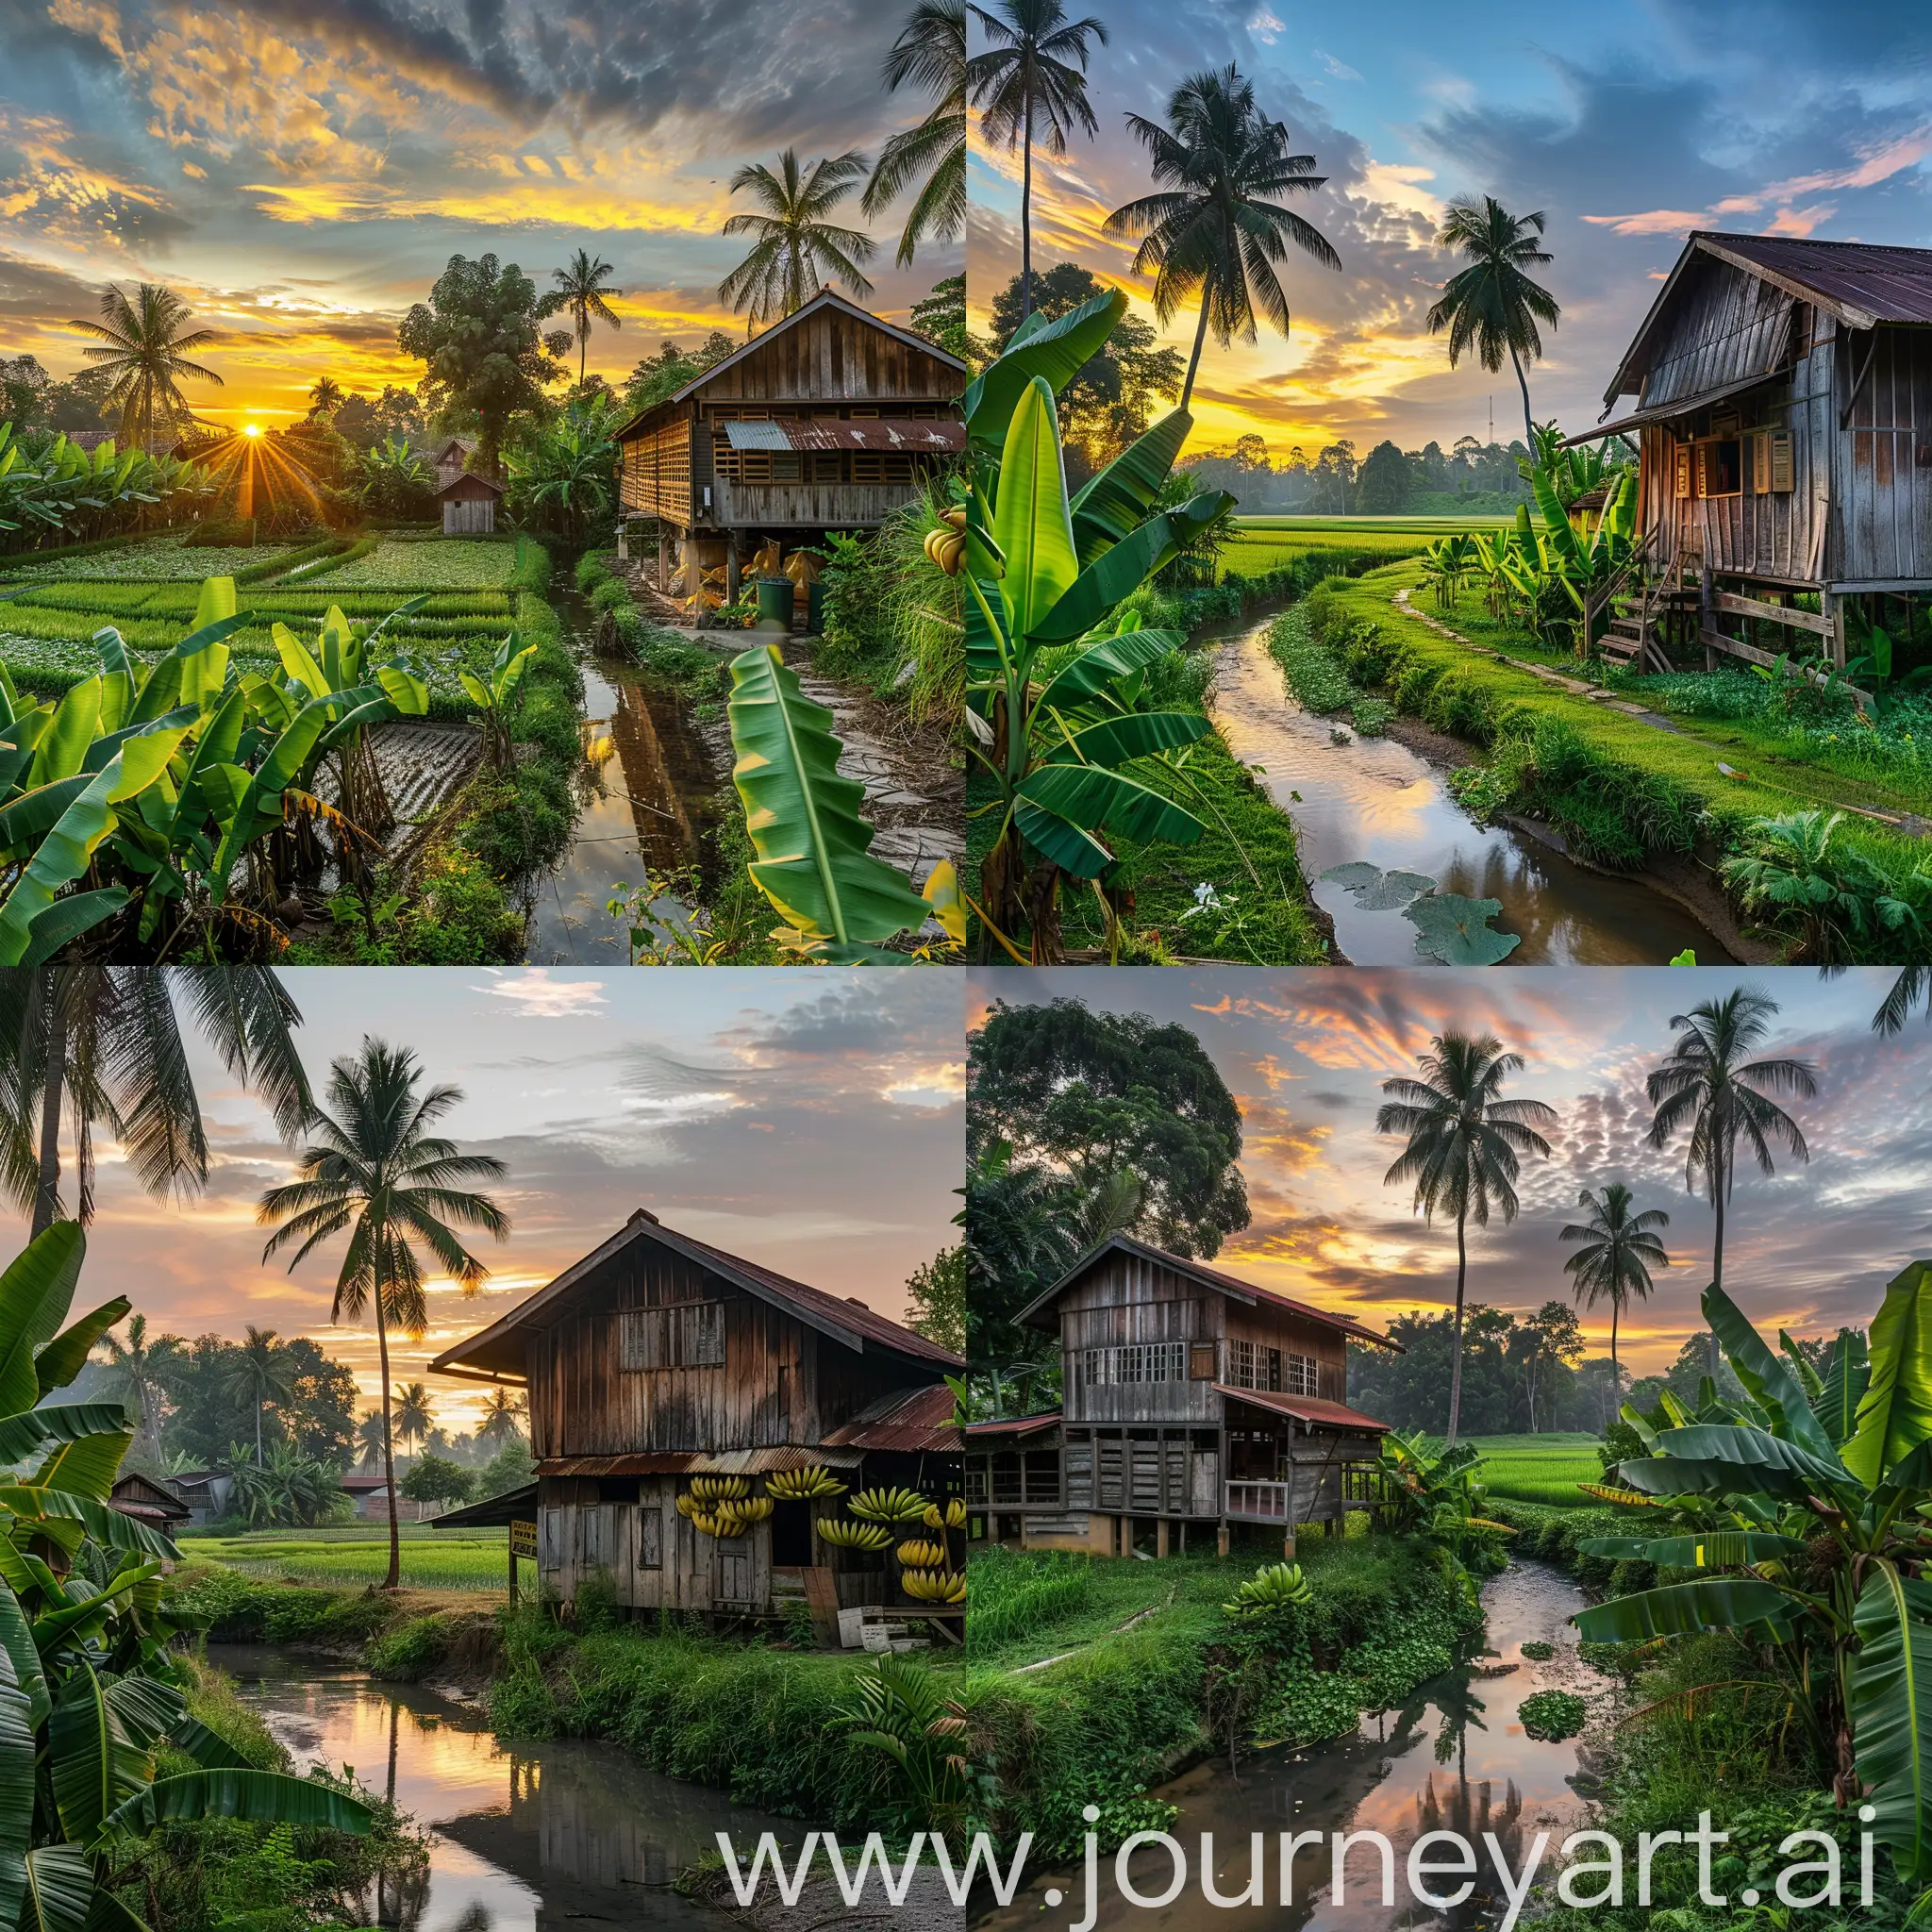 Scenic-Morning-in-a-Traditional-Malay-Village-with-Wooden-Houses-and-Padi-Fields